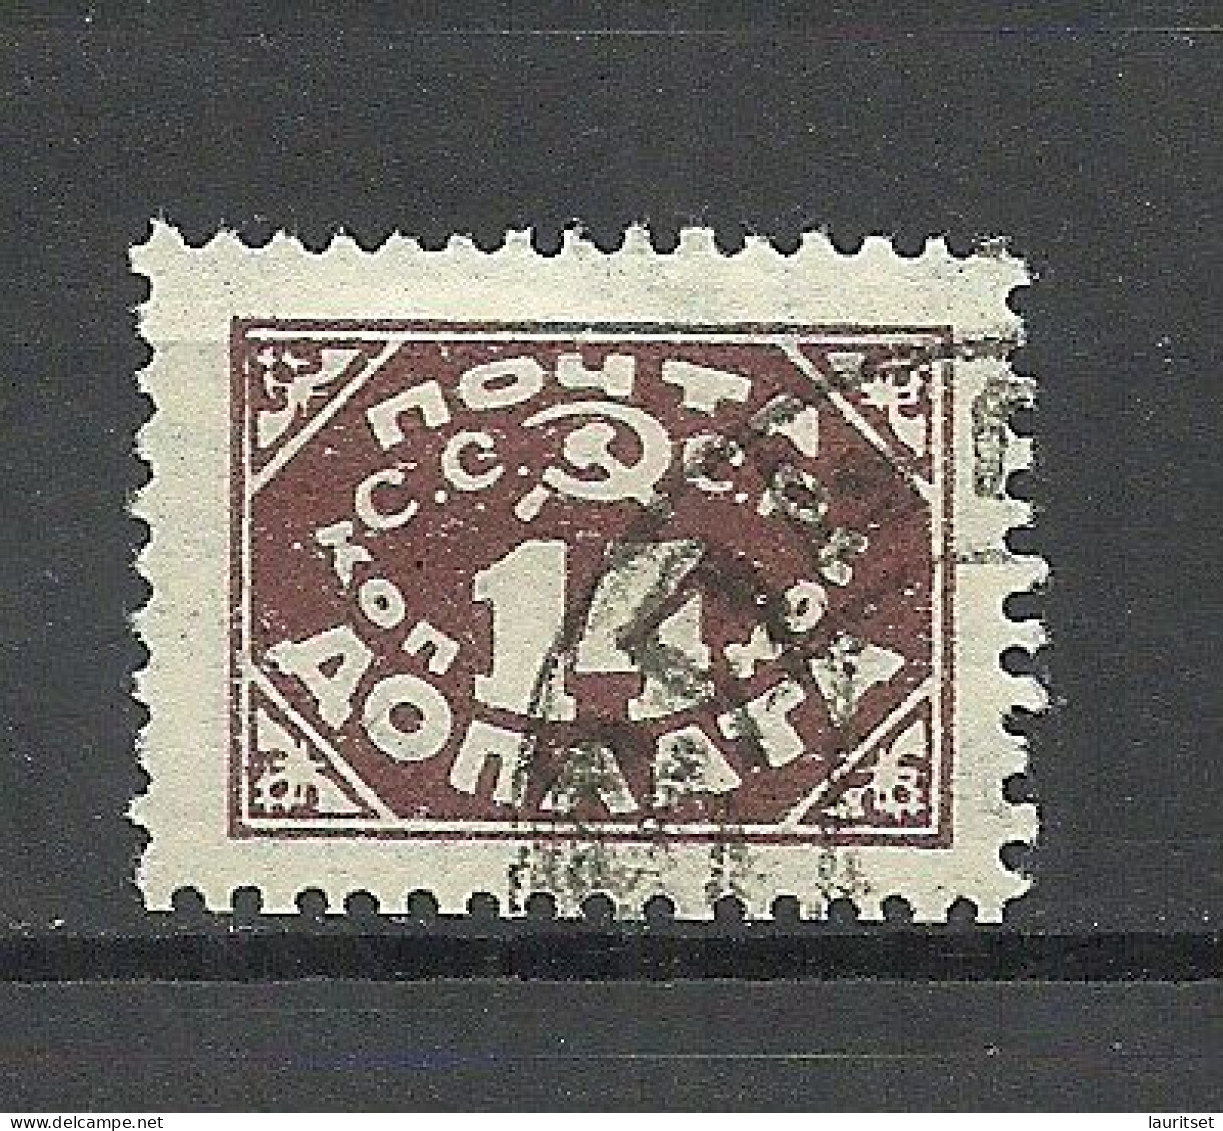 RUSSLAND RUSSIA 1925 Porto Postage Due Michel 17, Watermarked, Perf 12 O - Tasse